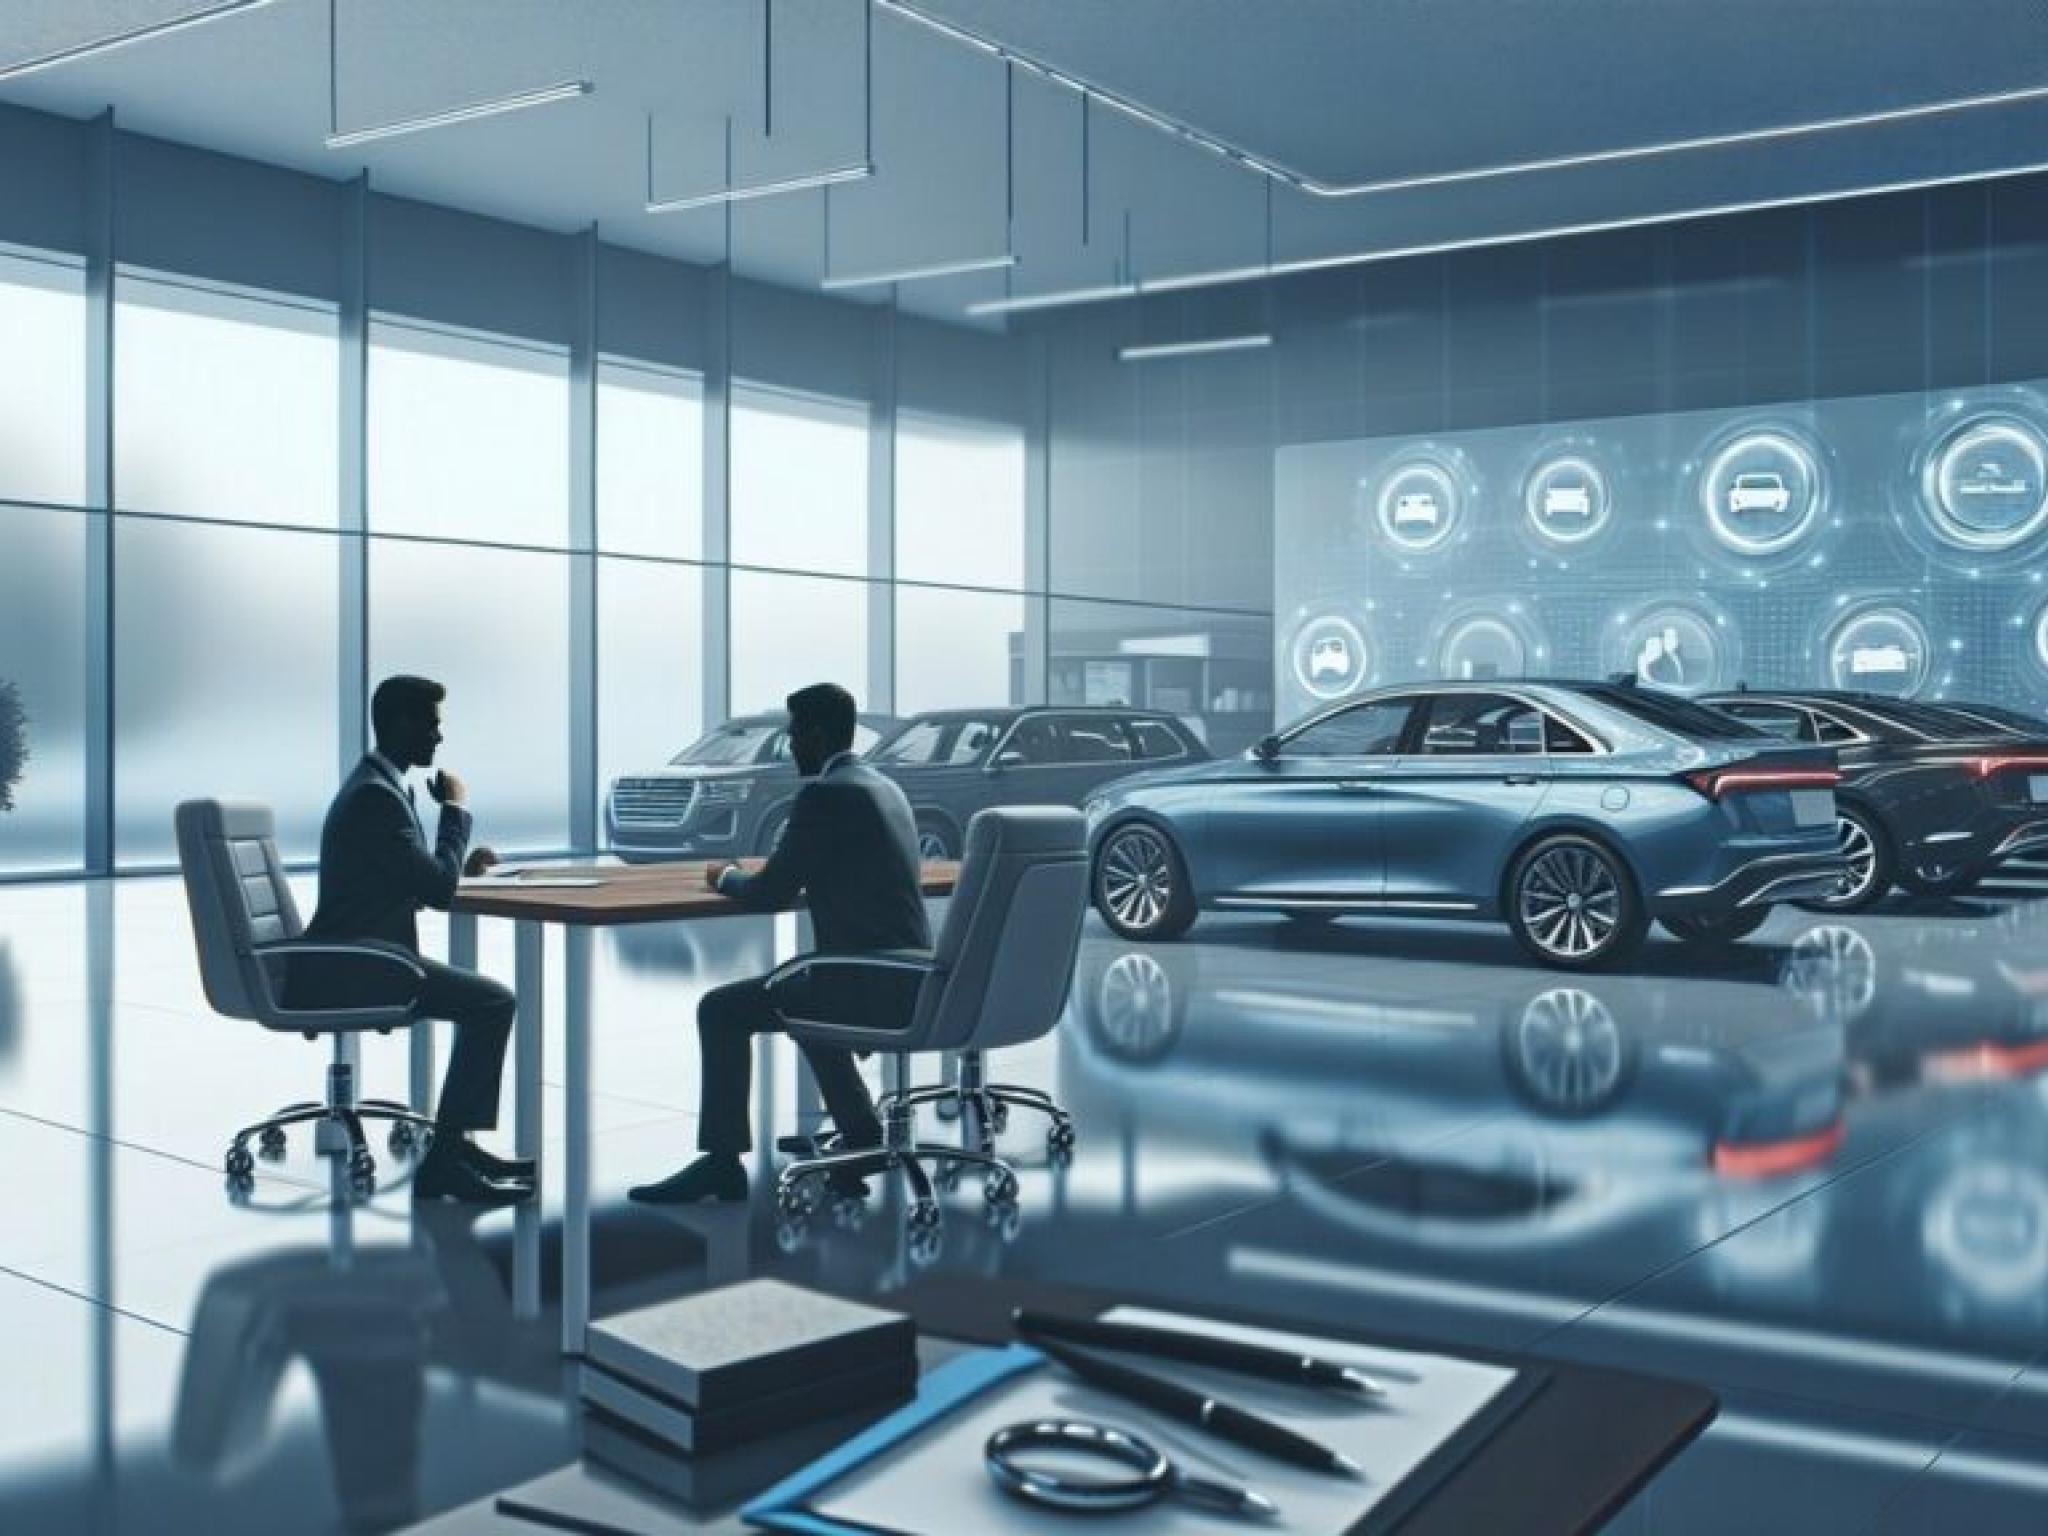  car-dealership-data-provider-suffers-cyber-incident-actively-investigates 